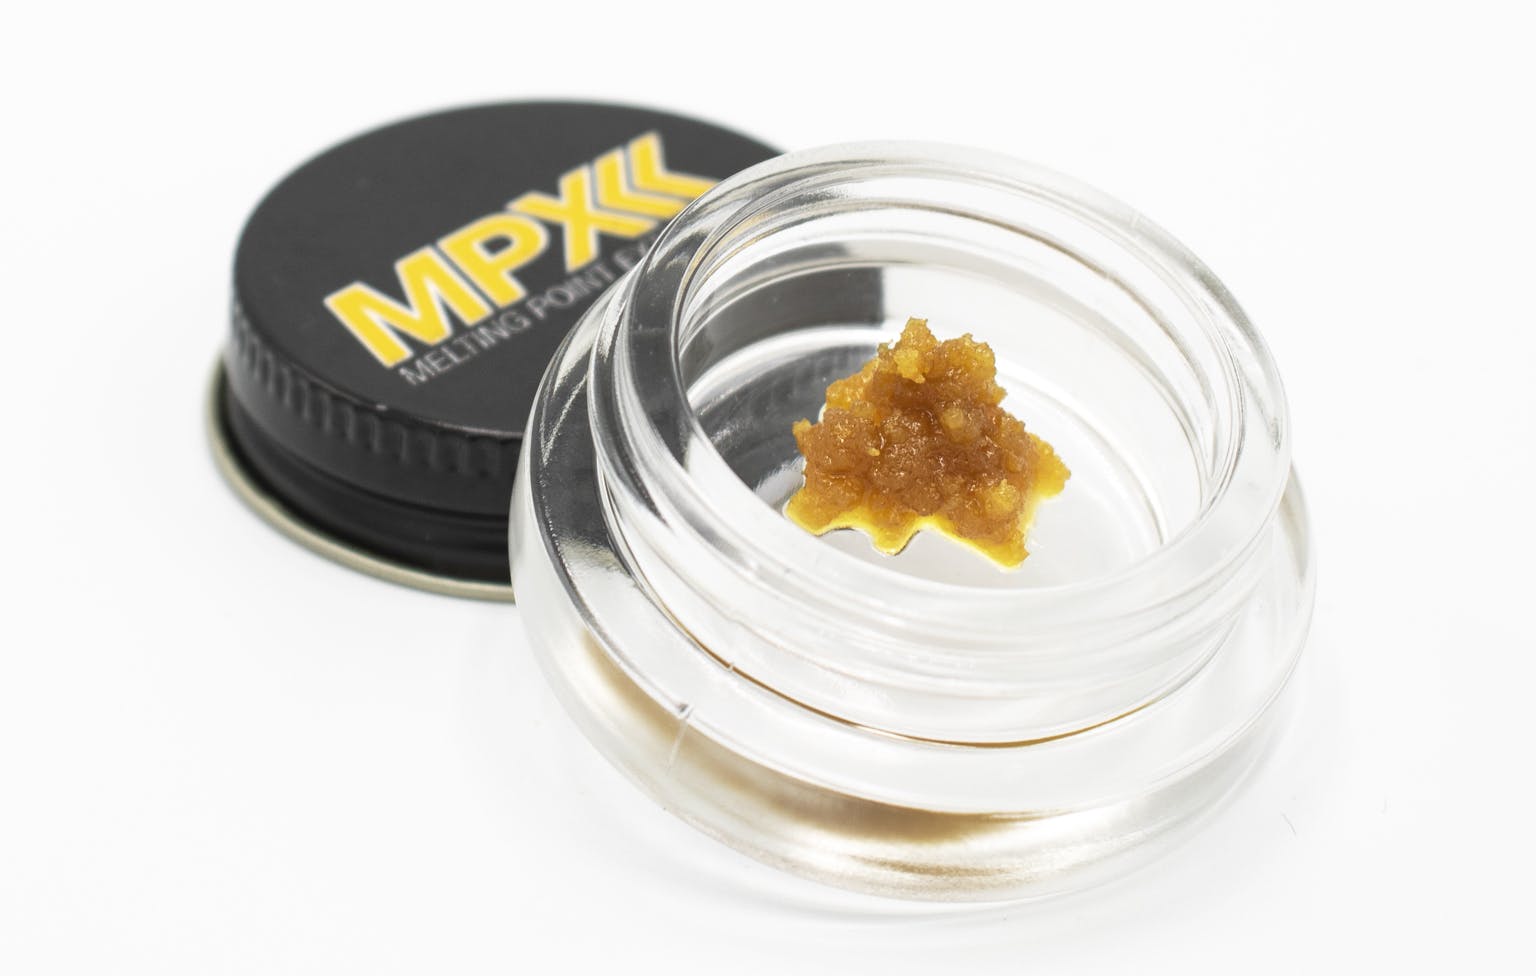 concentrate-tangie-og-cush-cr-cake-batter-5g-mpx